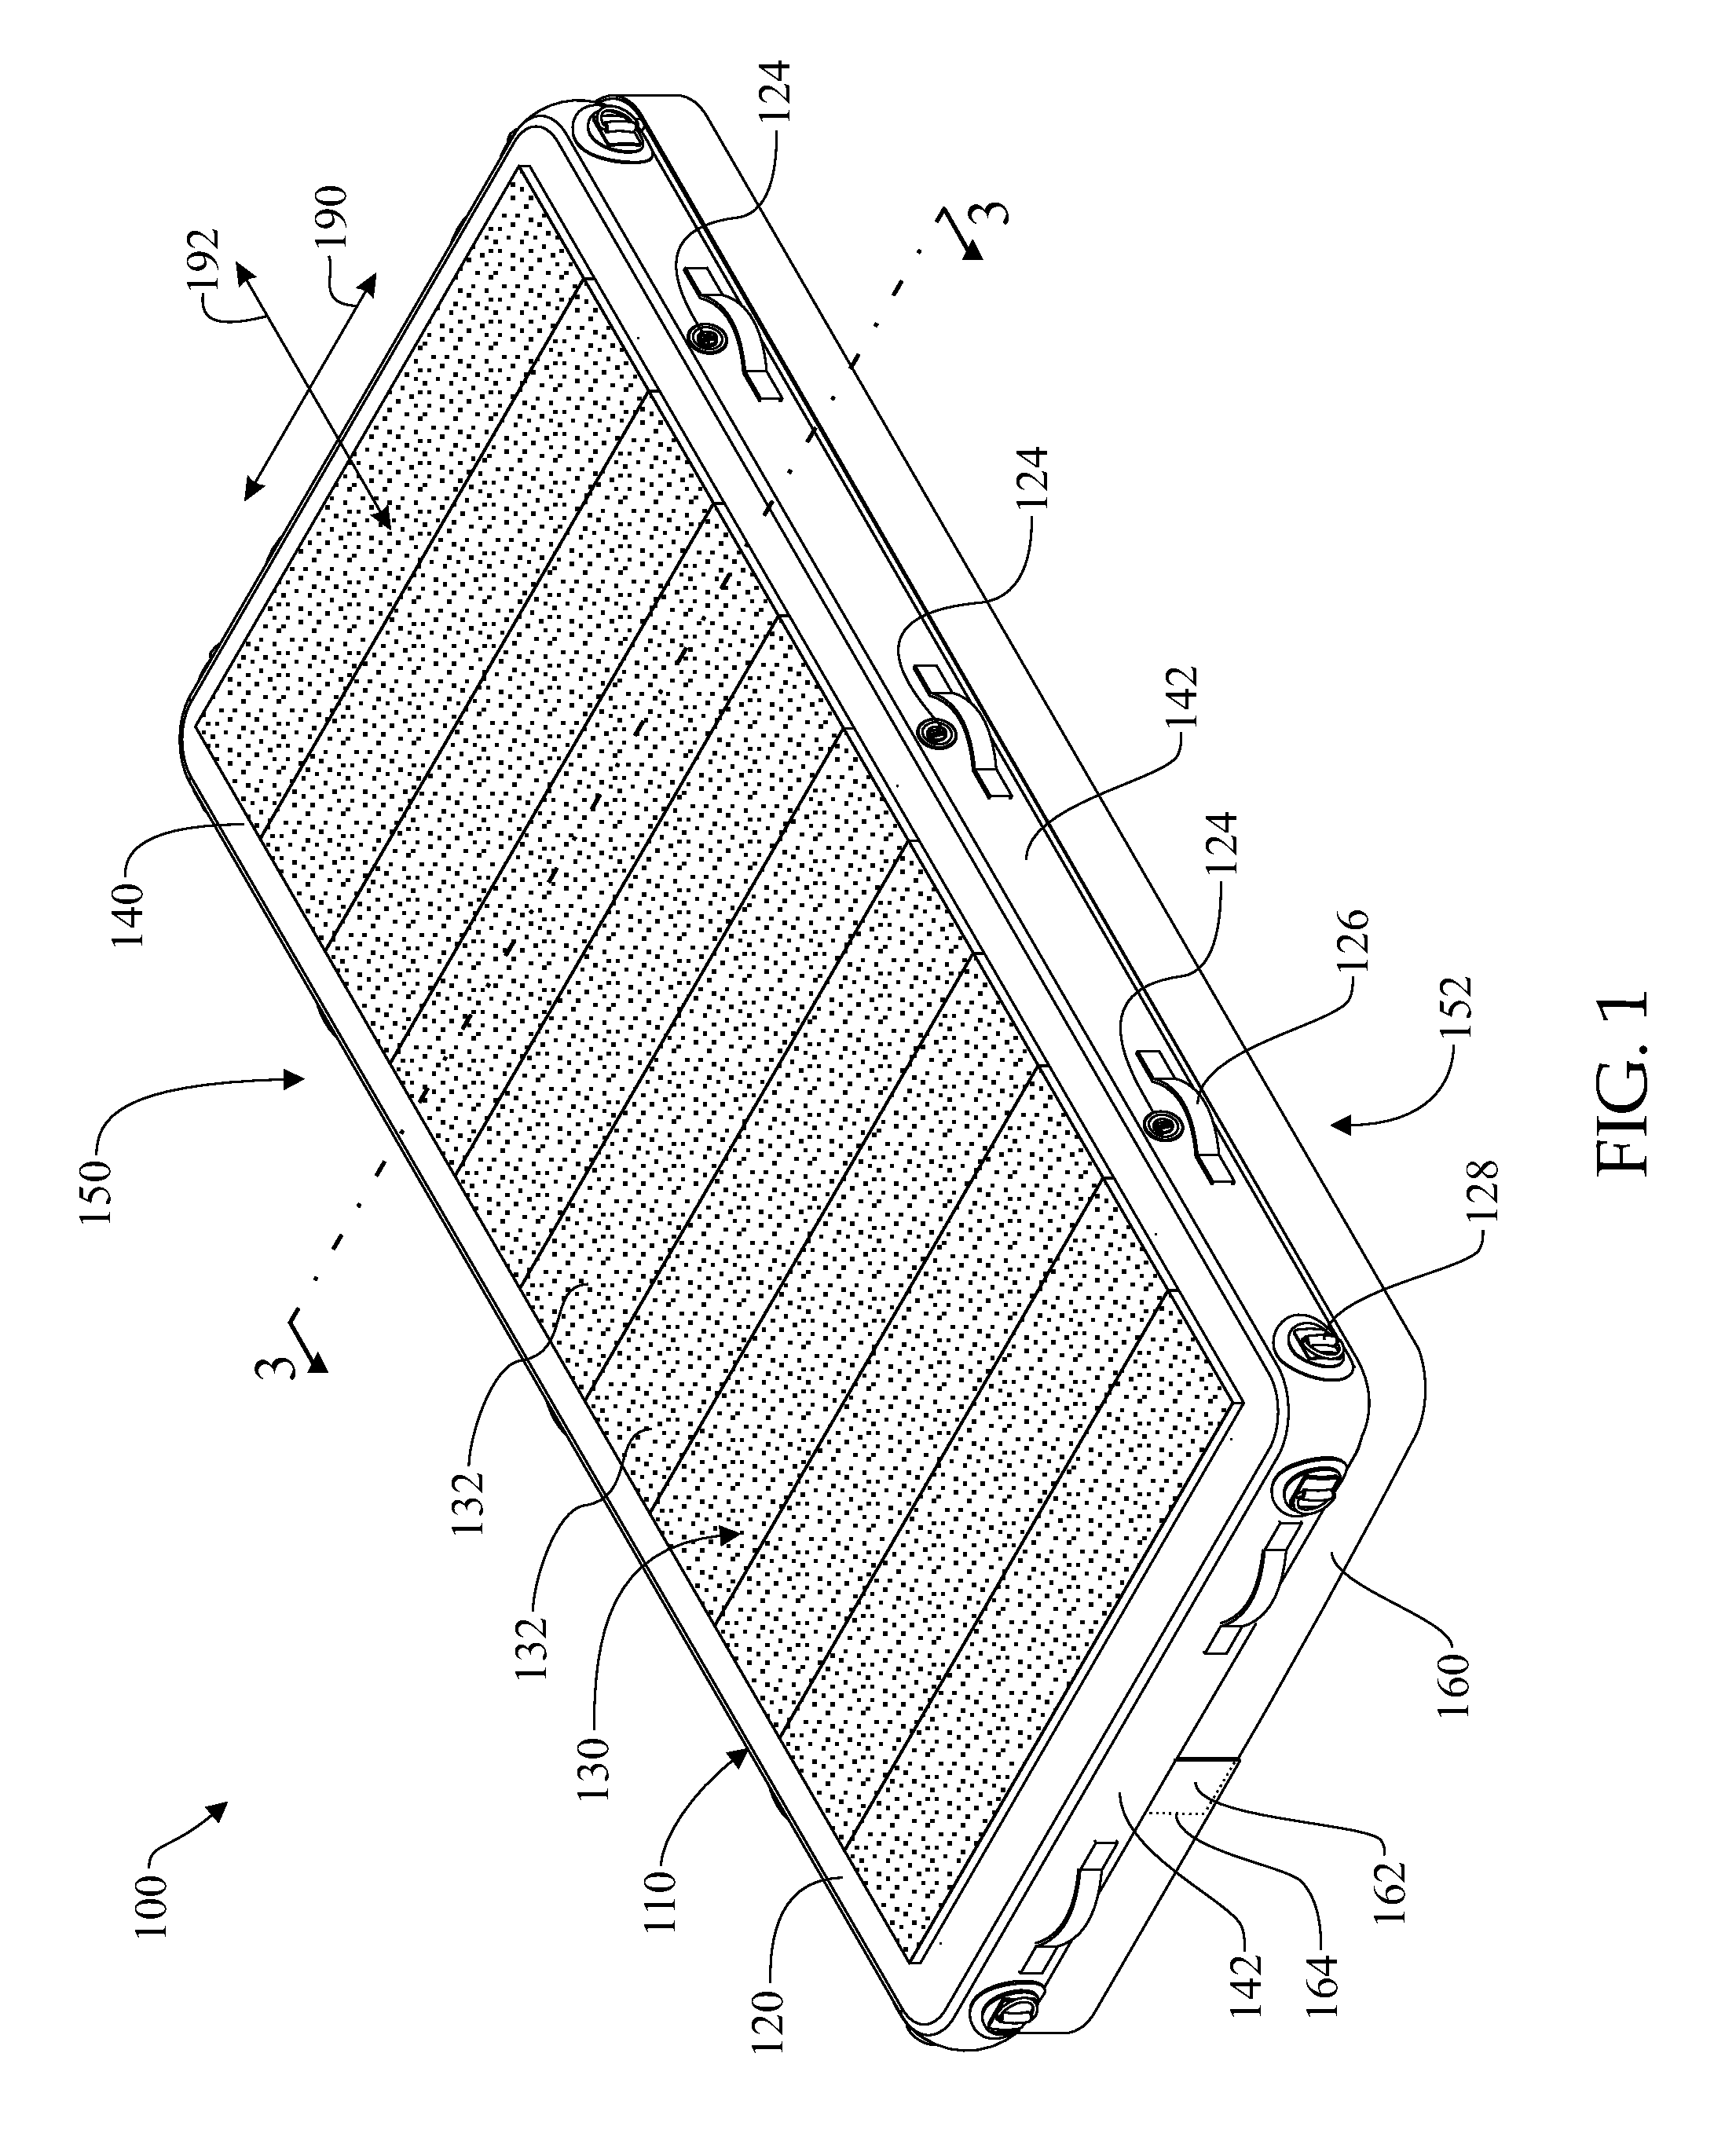 Non-self-propelled floatable structure provided with a stabilizing skirt